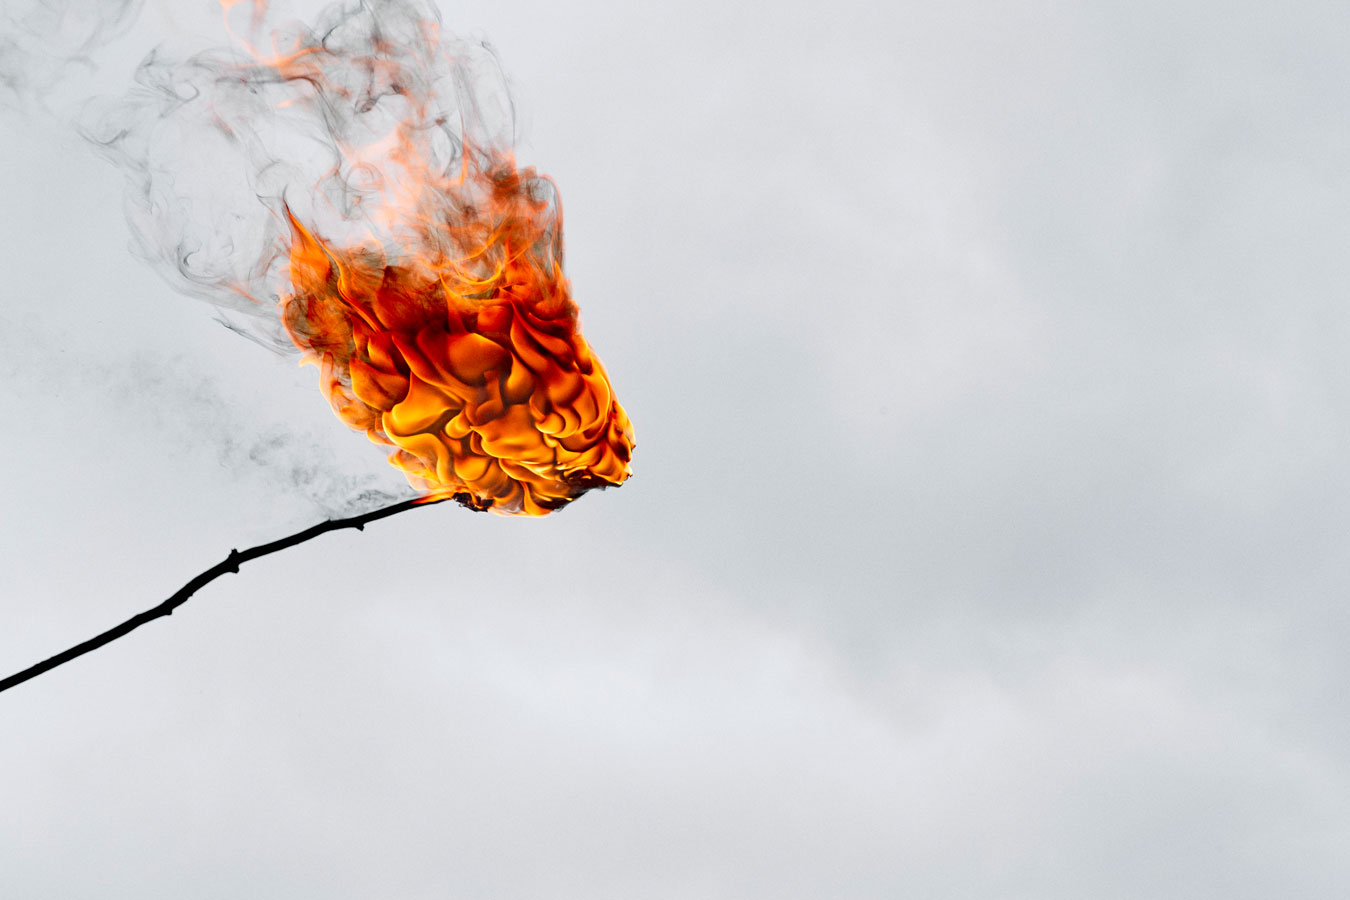 detailed-photograph-of-stick-burning-against-grey-background